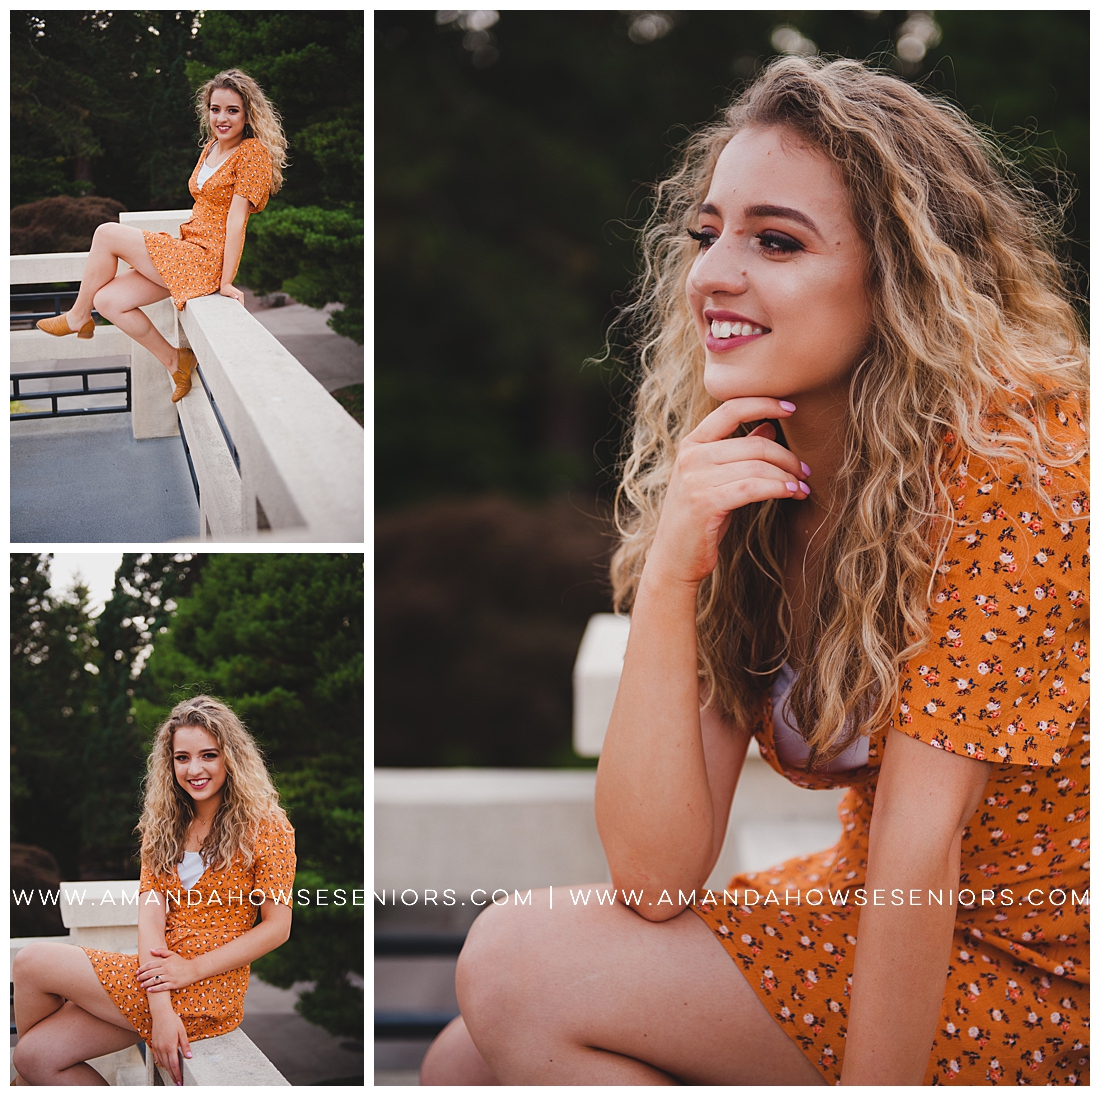 Boho Chic Senior Portraits with Yellow Floral Dress and Cute Poses Photographed by Tacoma Senior Photographer Amanda Howse